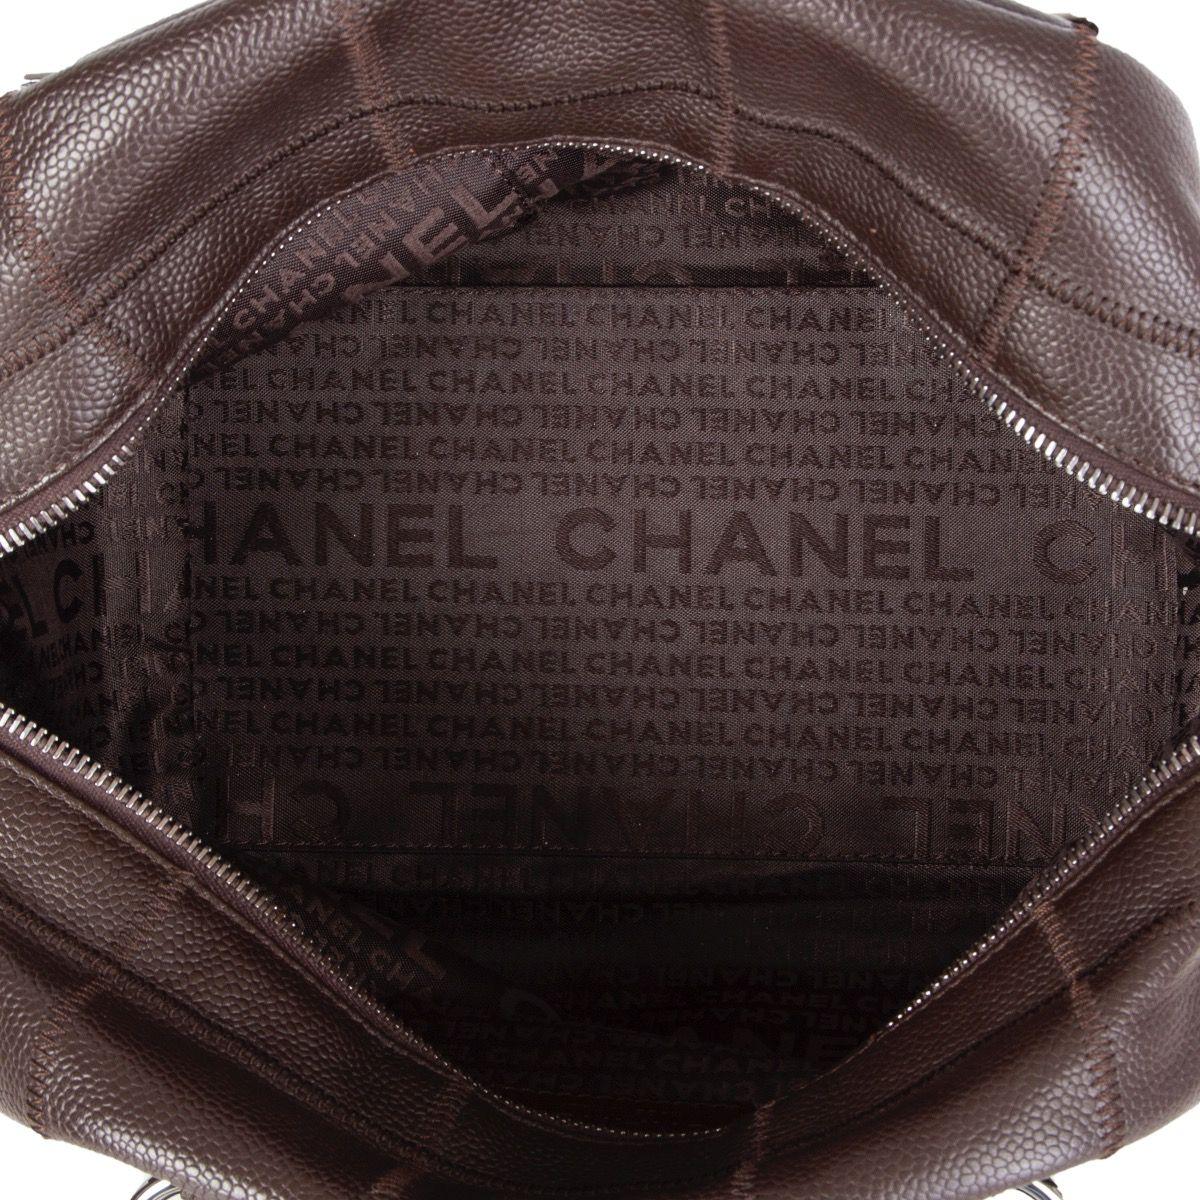 CHANEL brown SQUARE QUILTED leather SMALL BOWLER Shoulder Bag 1